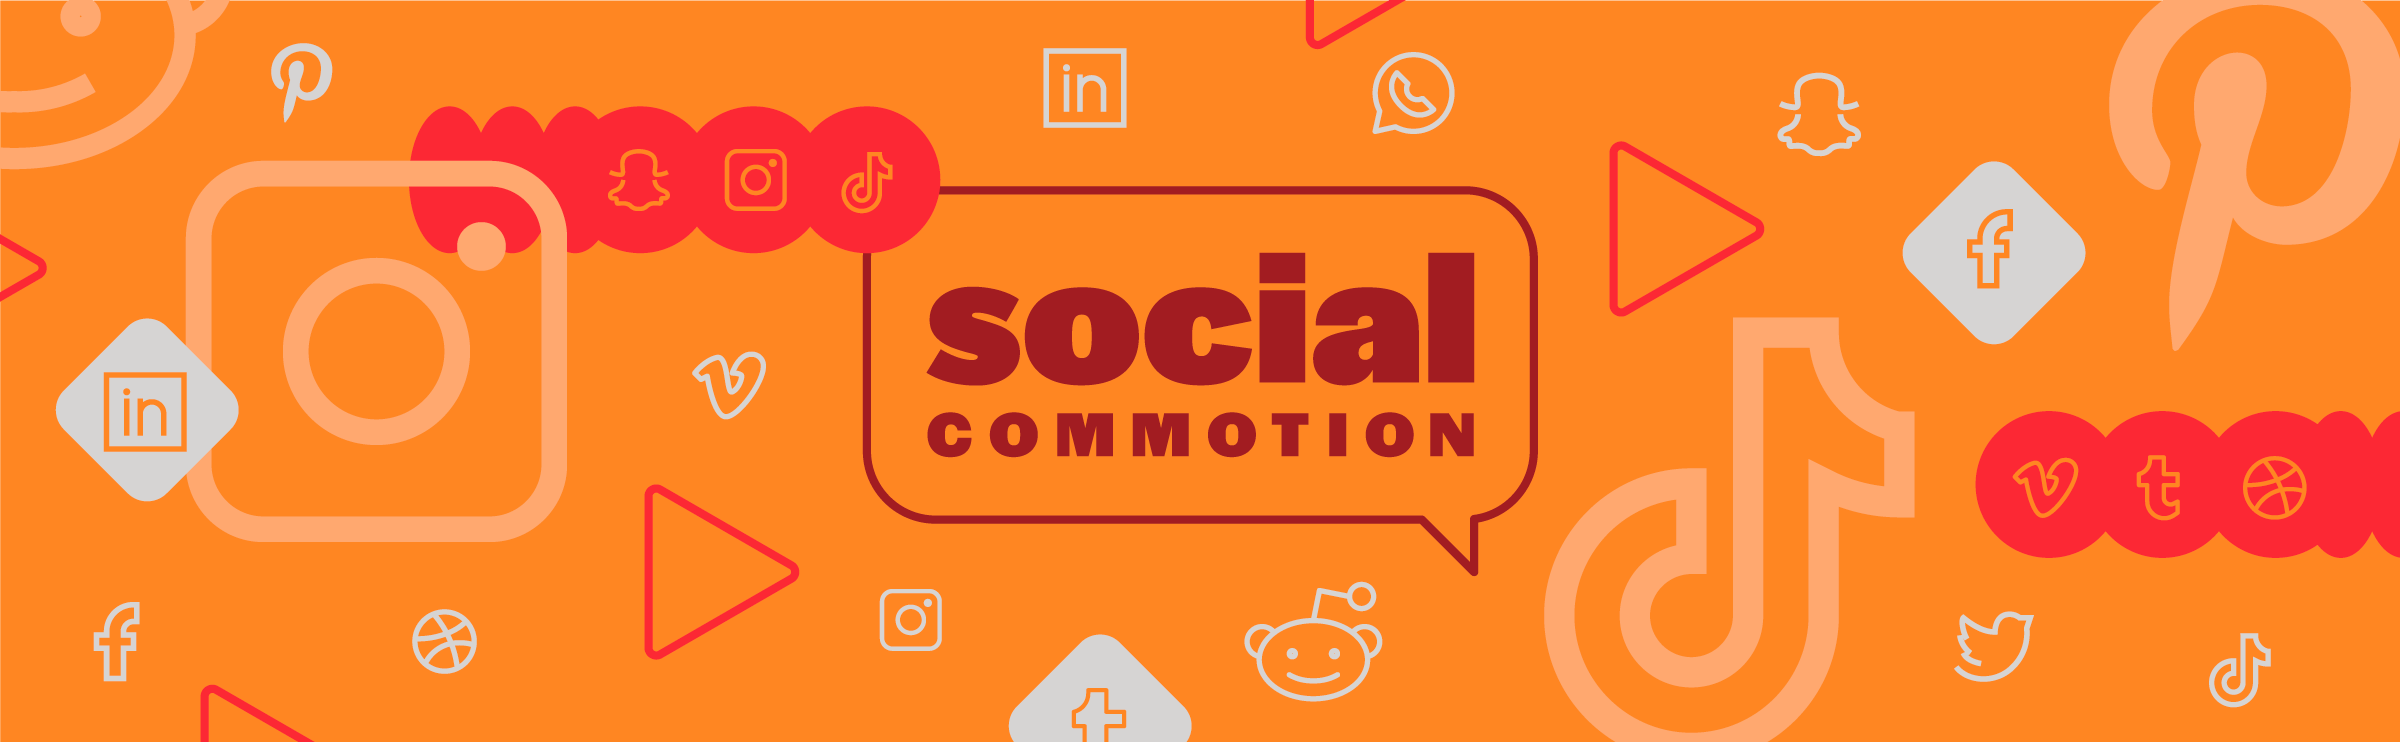 Social Commotion image with social media icons at various sizes